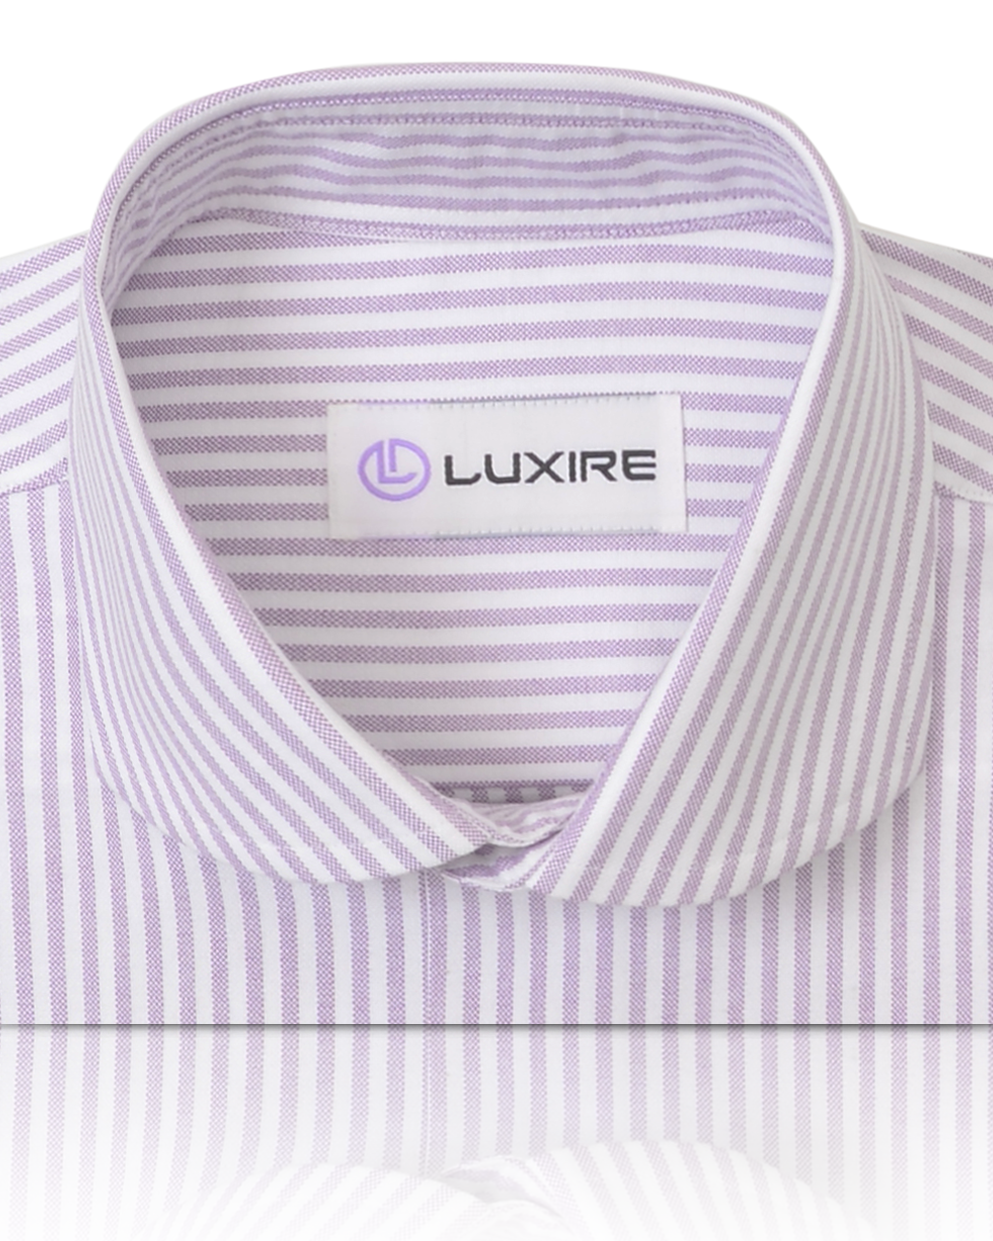 Collar of the custom oxford shirt for men by Luxire in white with pale mauve stripes